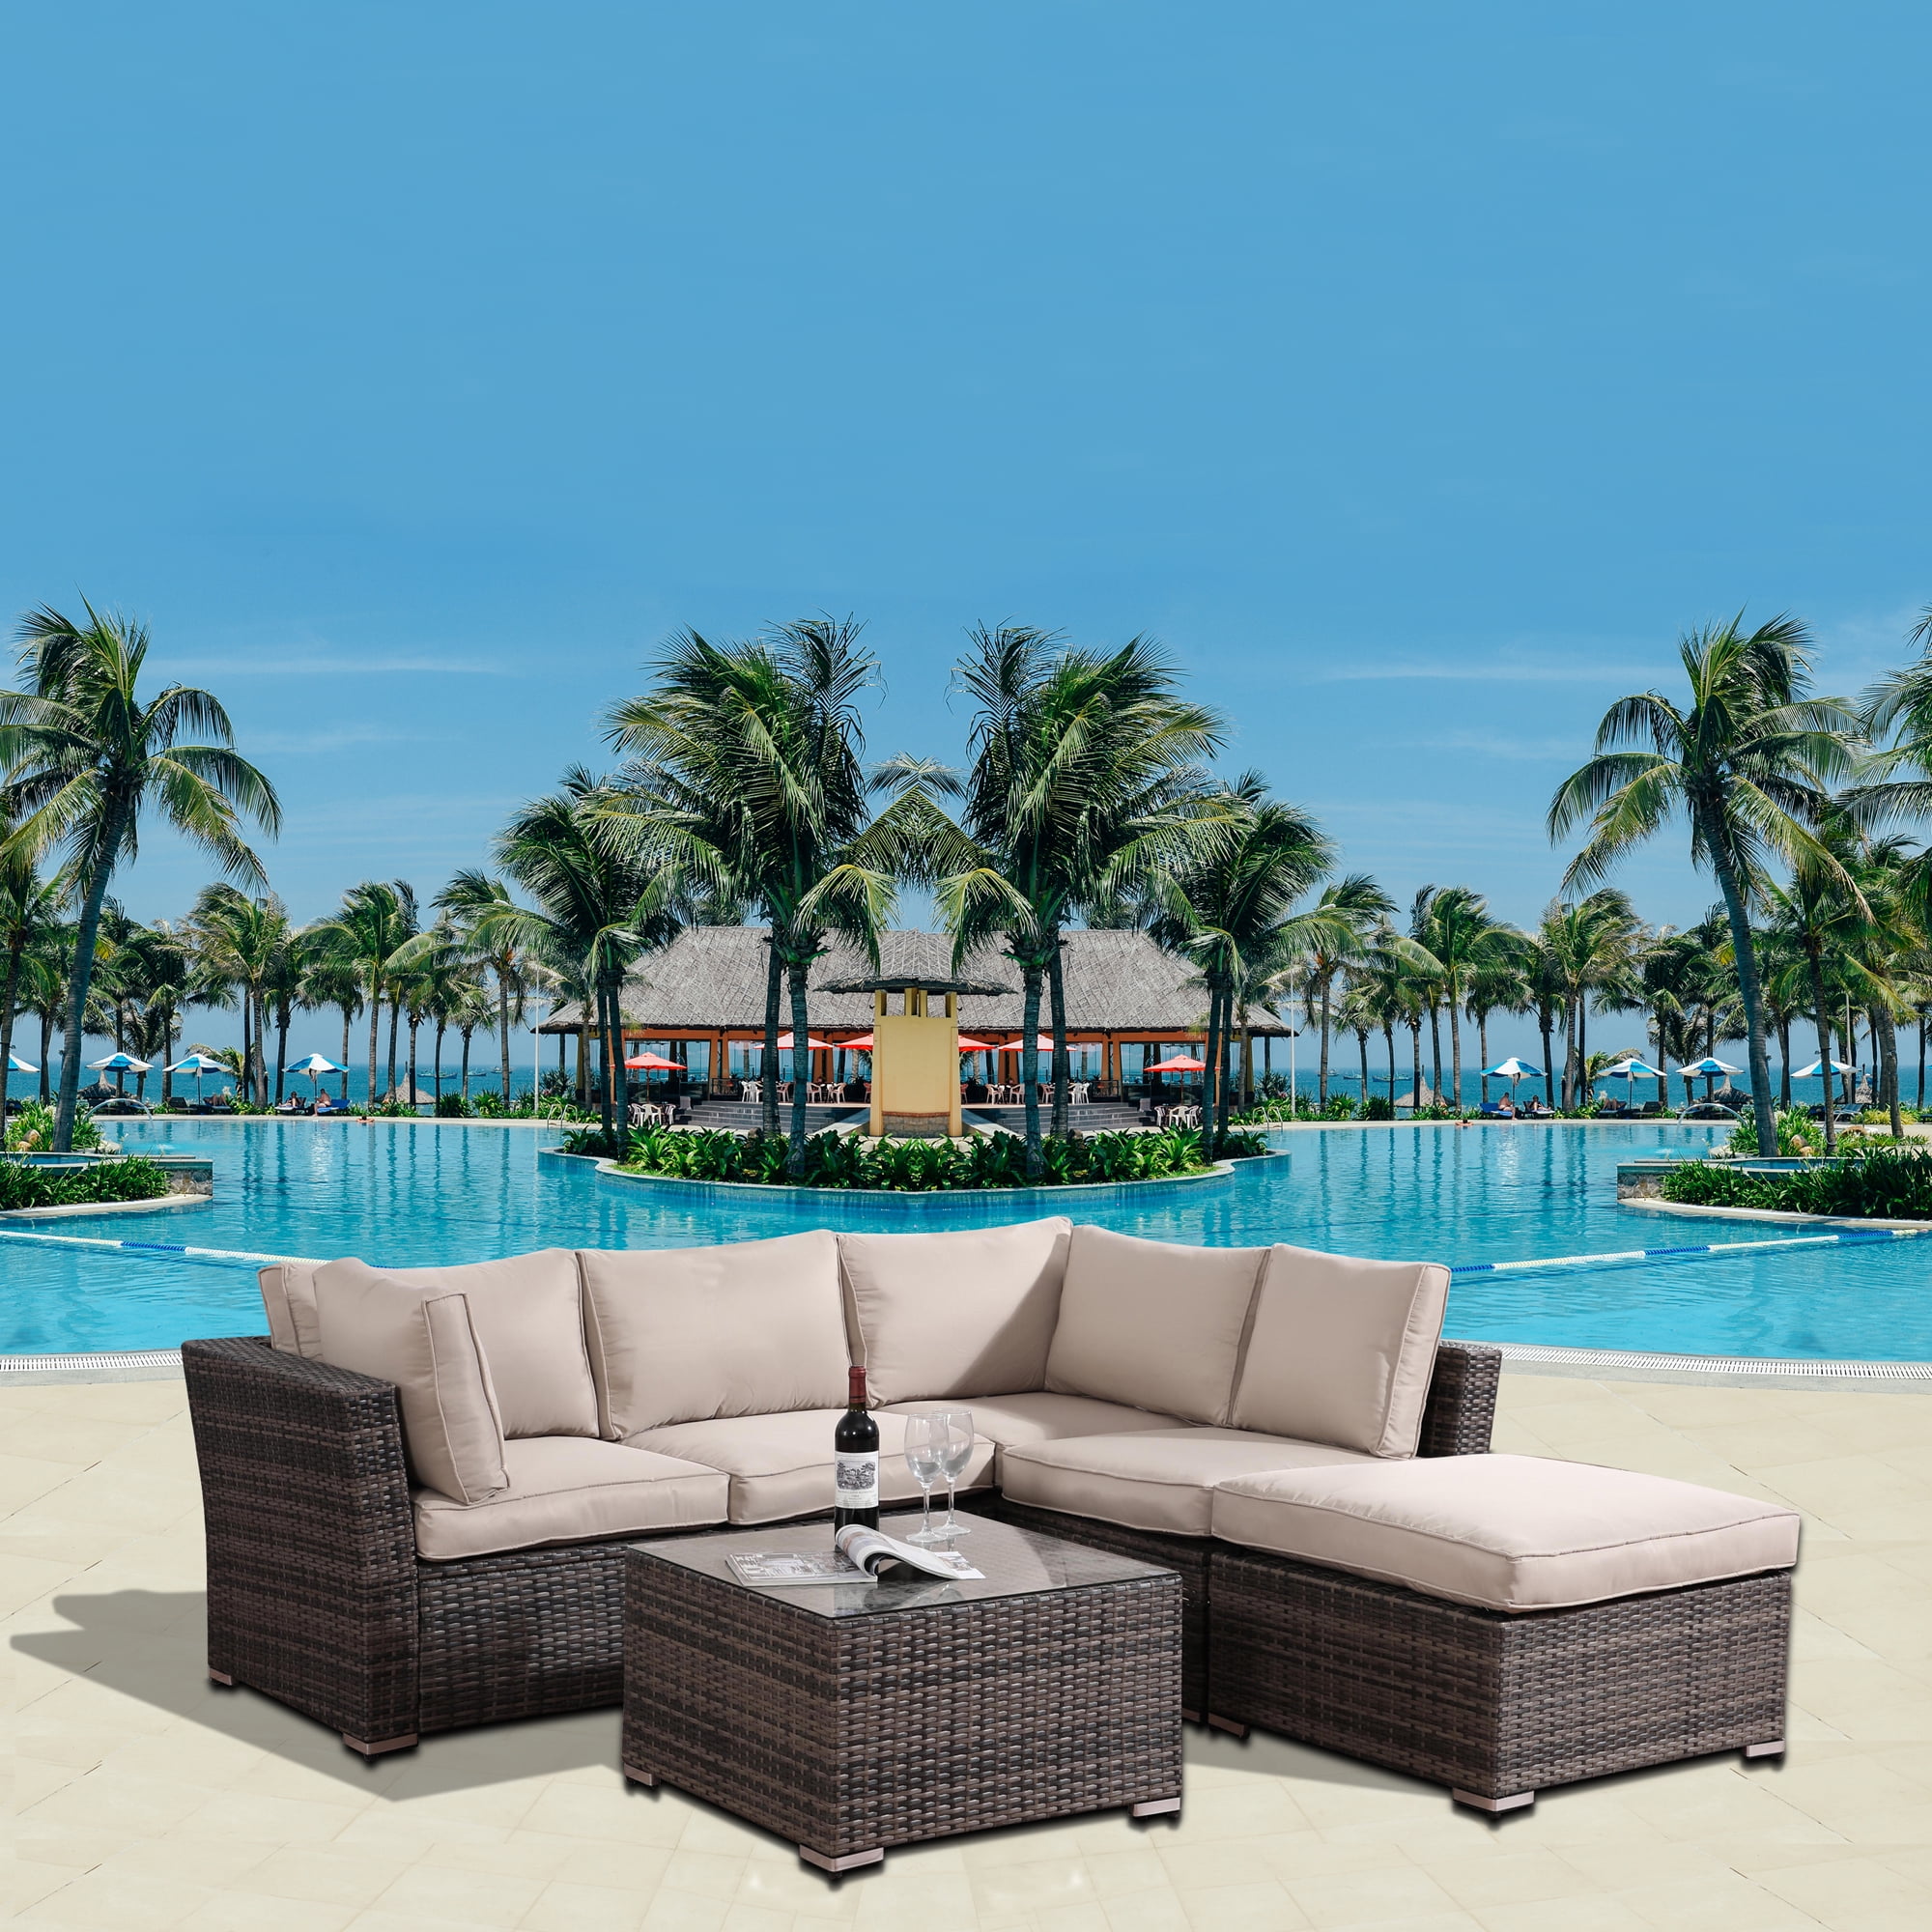 enyopro 4 Pieces PE Rattan Wicker Sofa Set, Outdoor Patio Sectional Furniture Set with Cushions and Tea Table, All-Weather Wicker Lawn Conversation Sets with Full Size Waterproof Cover, B151